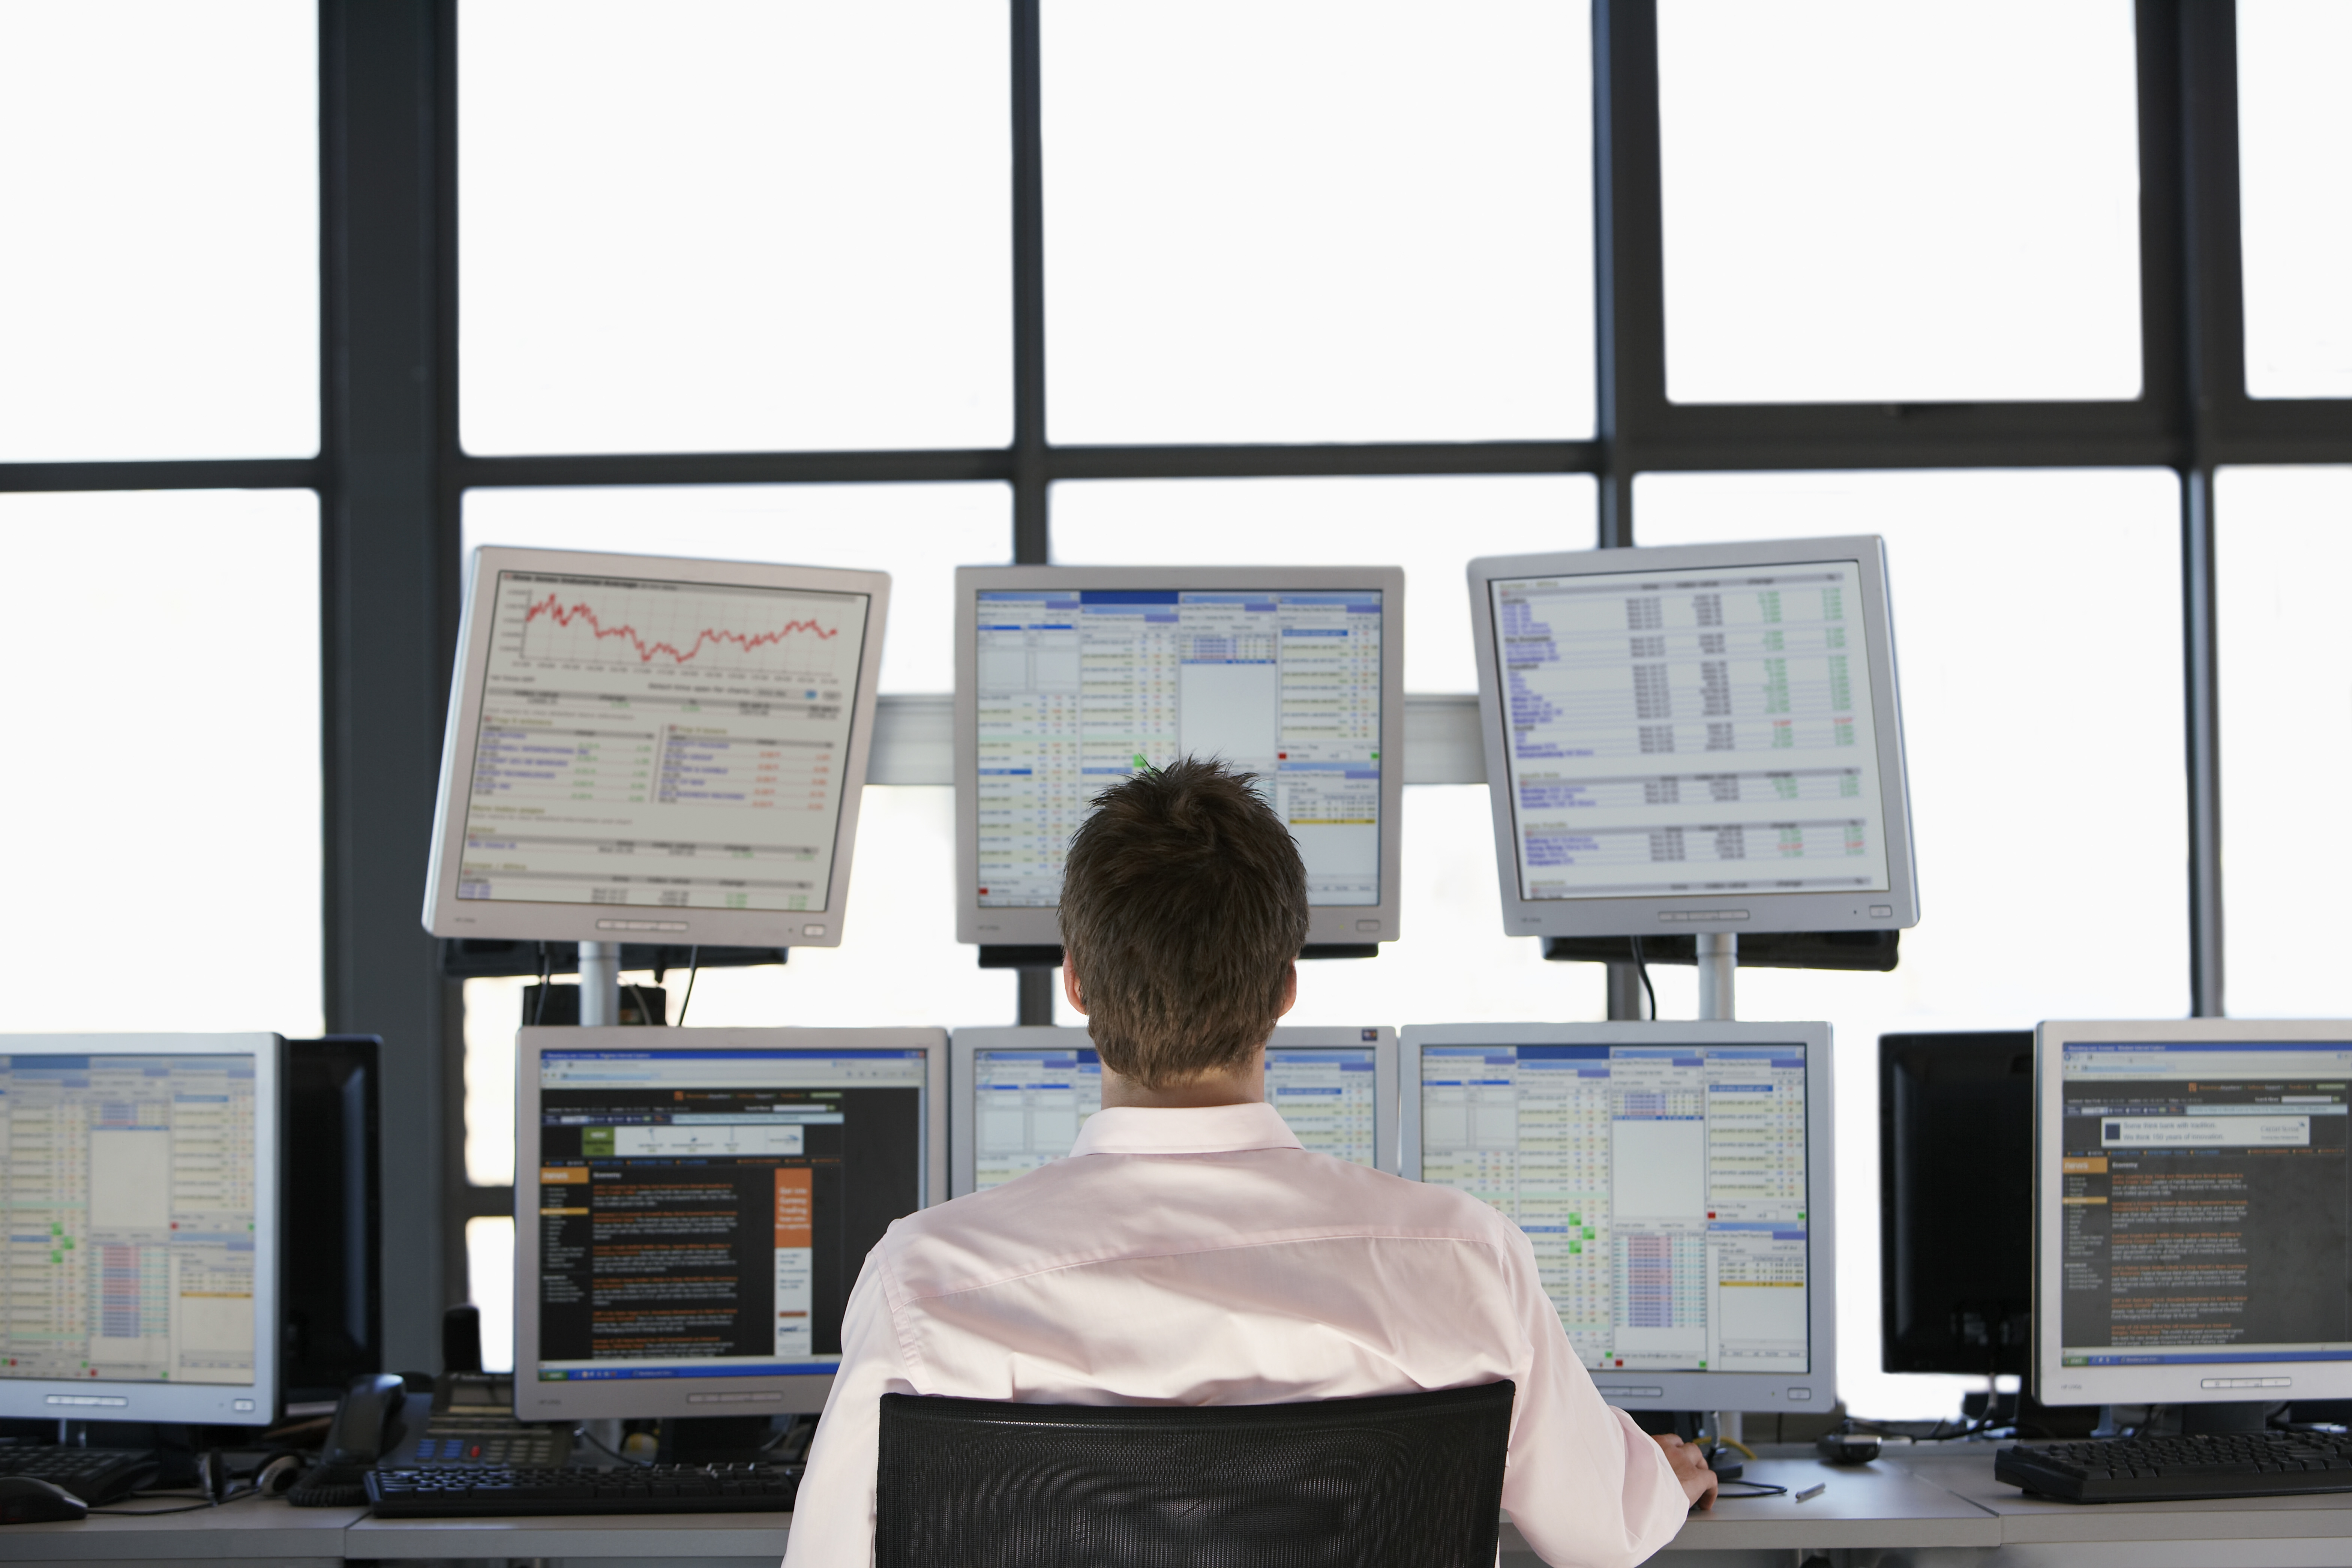 Rear view of stock trader looking at multiple computer screens